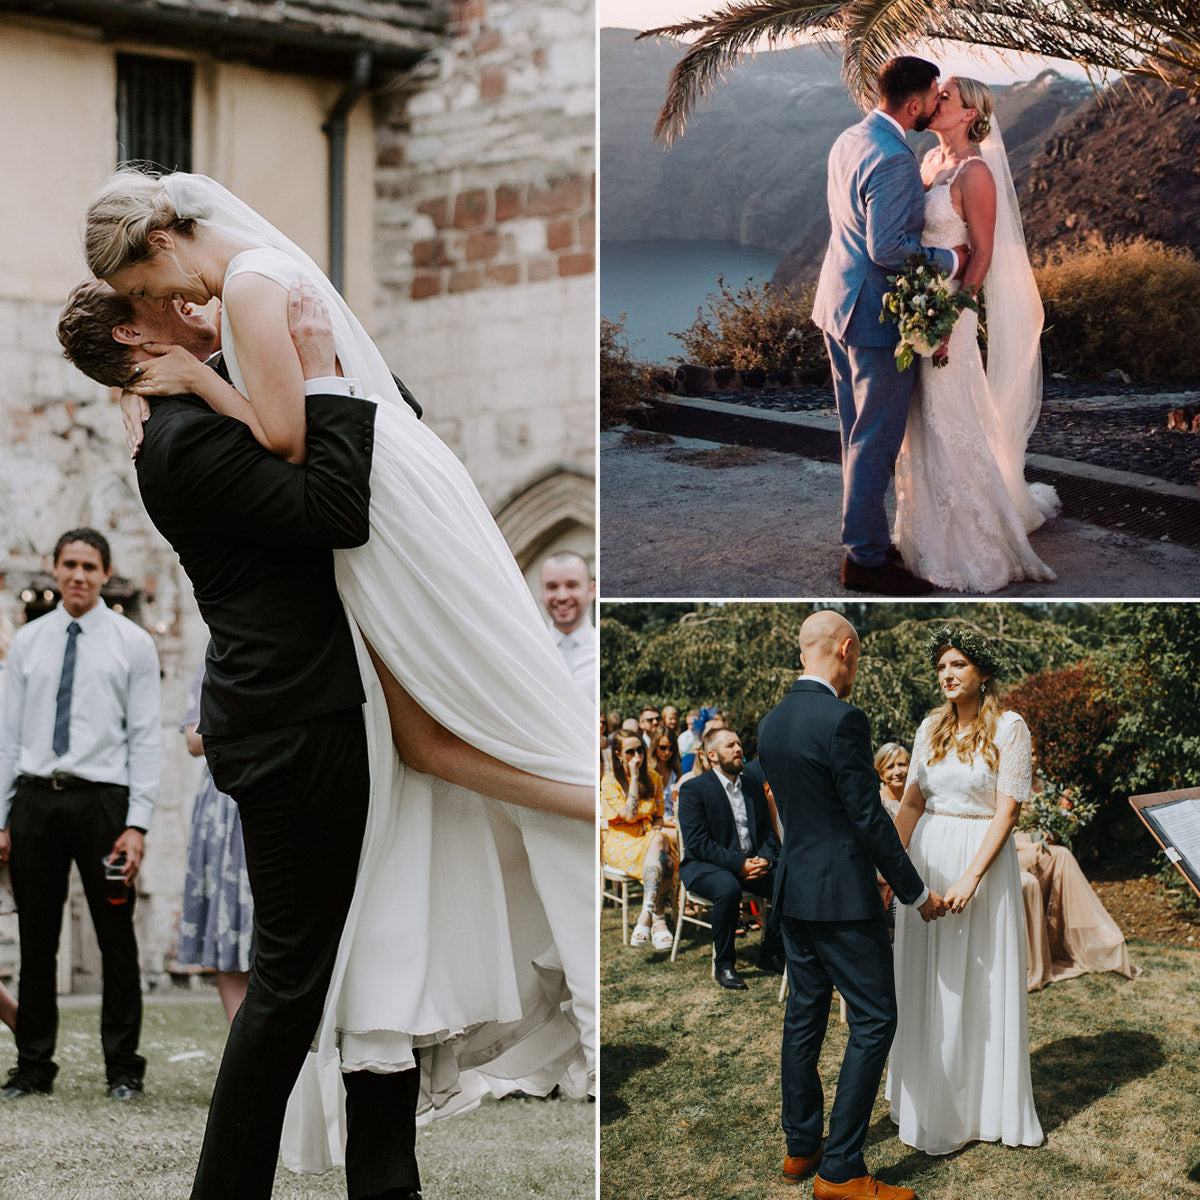 Wedding Day Photos You Simply Must Capture – Ideas from the Professionals